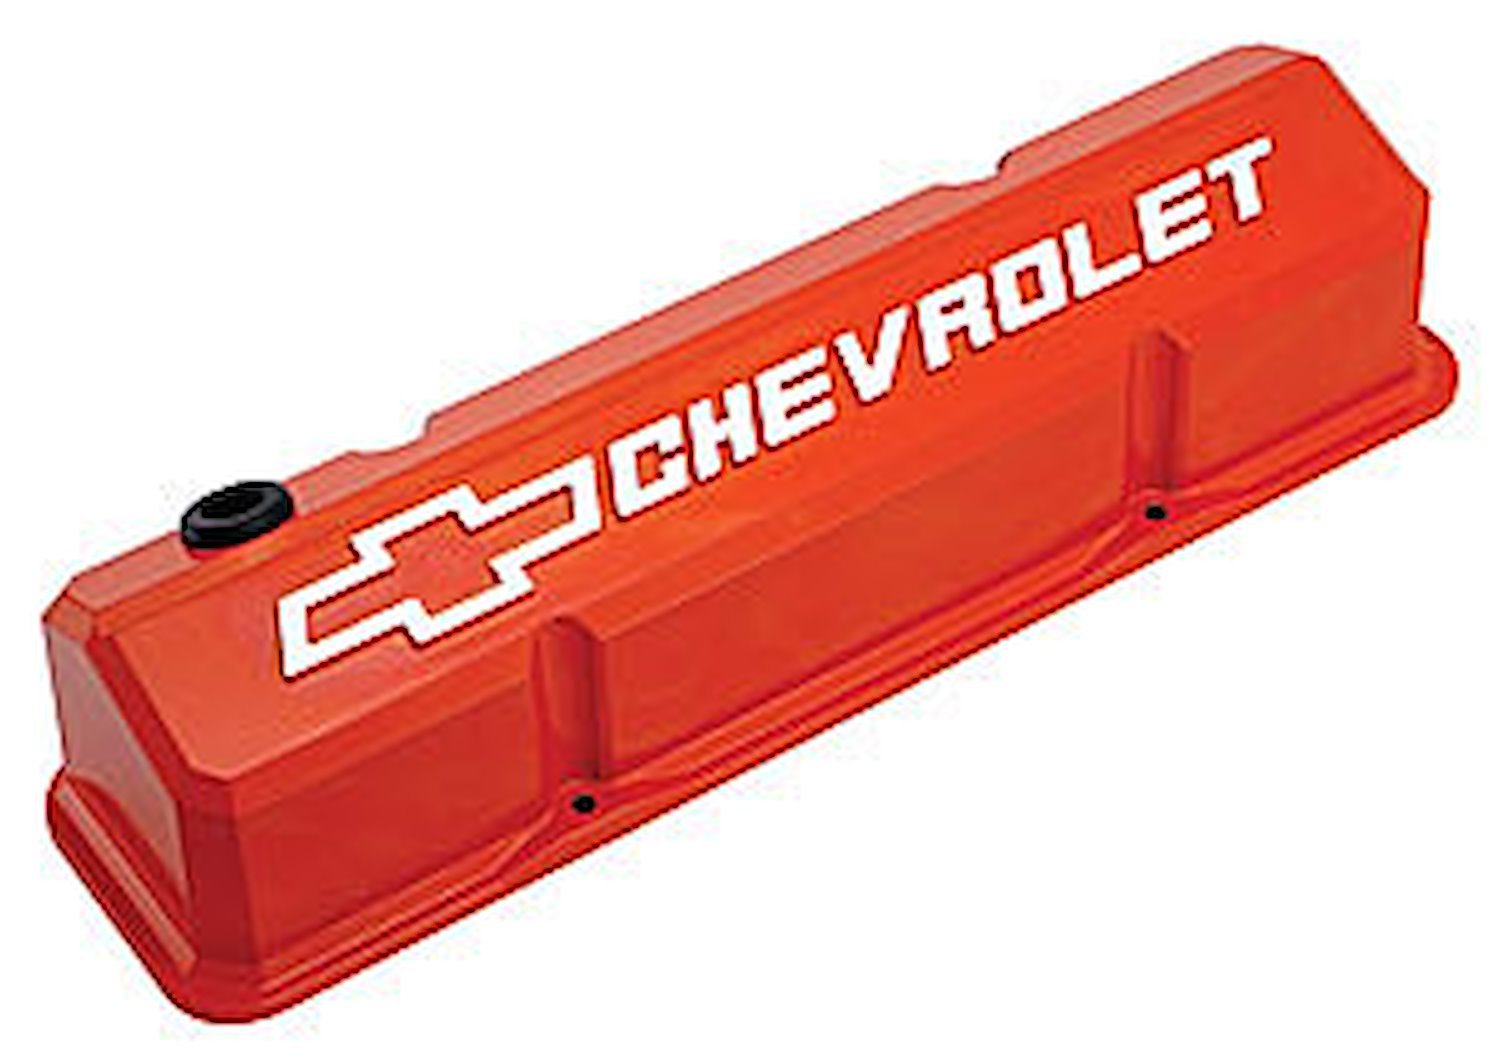 Die-Cast Slant-Edge Valve Covers for 1958-1986 Small Block Chevy with Chevrolet/Bowtie Raised Emblem in Chevy Orange Finish